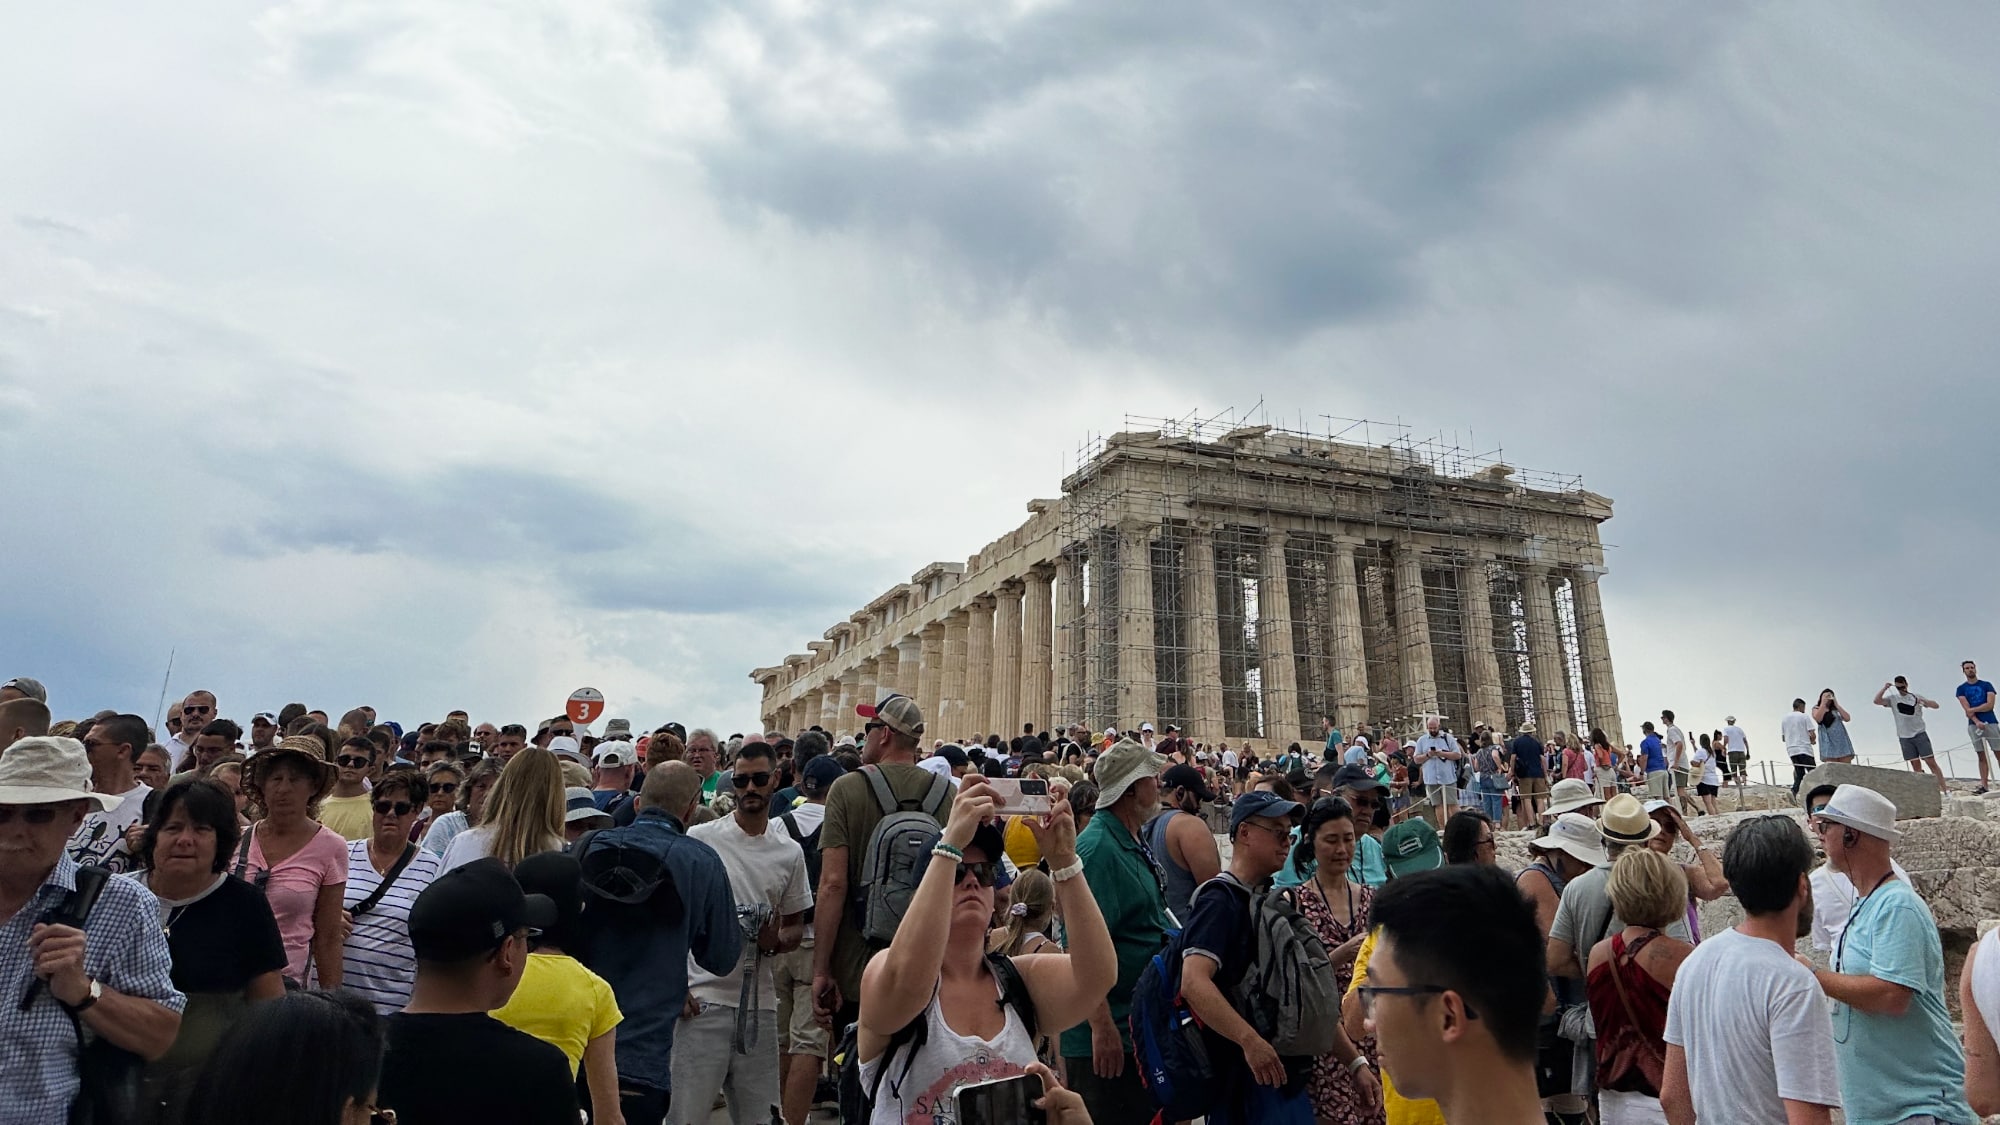 Lots of people crowding an under-construction Parthenon